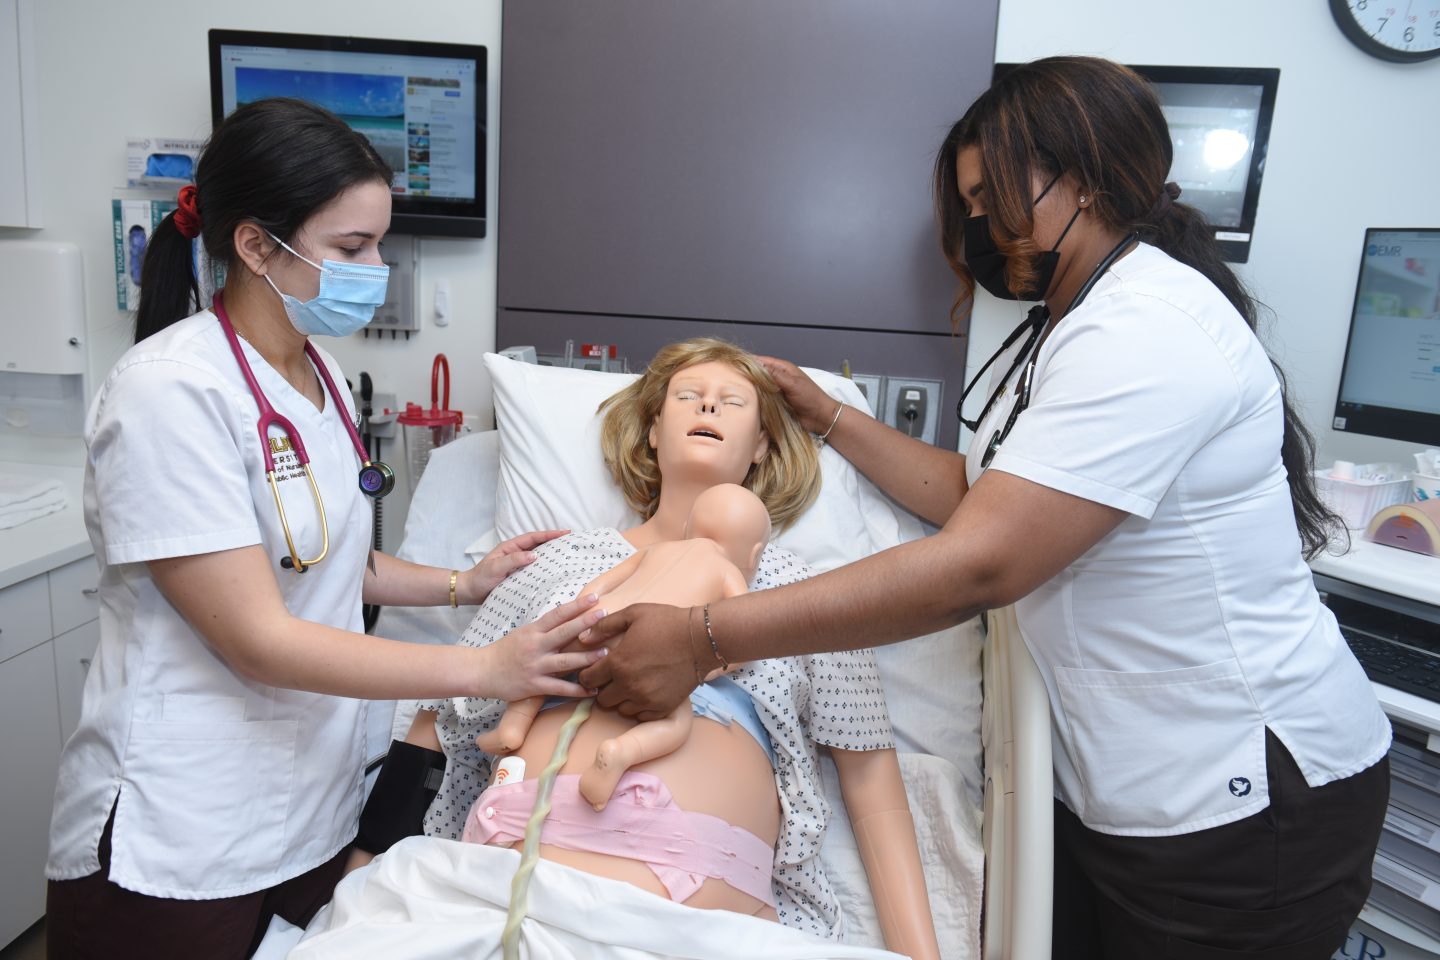 Victoria, a high-fidelity maternal simulator manikin, arrived at CESiL with two baby manikins in March 2019—able to simulate a complete range of situations that nurses may face in the delivery room, from typical neonatal care to obstetric emergencies.